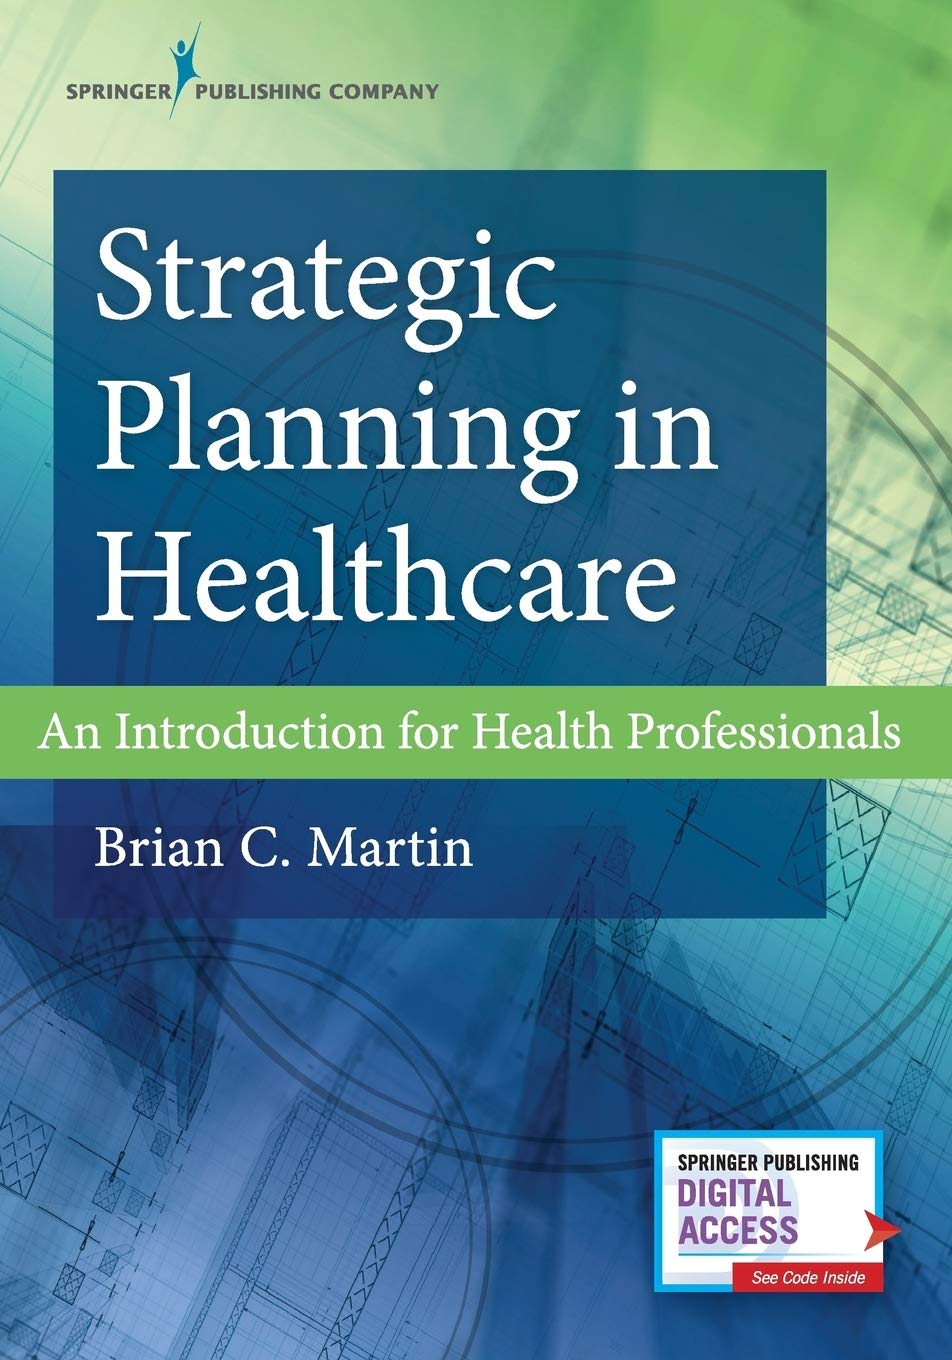 Strategic Planning in Healthcare: An Introduction for Health Professionals – Comprehensive Healthcare Management Textbook with Access to eBook and ...